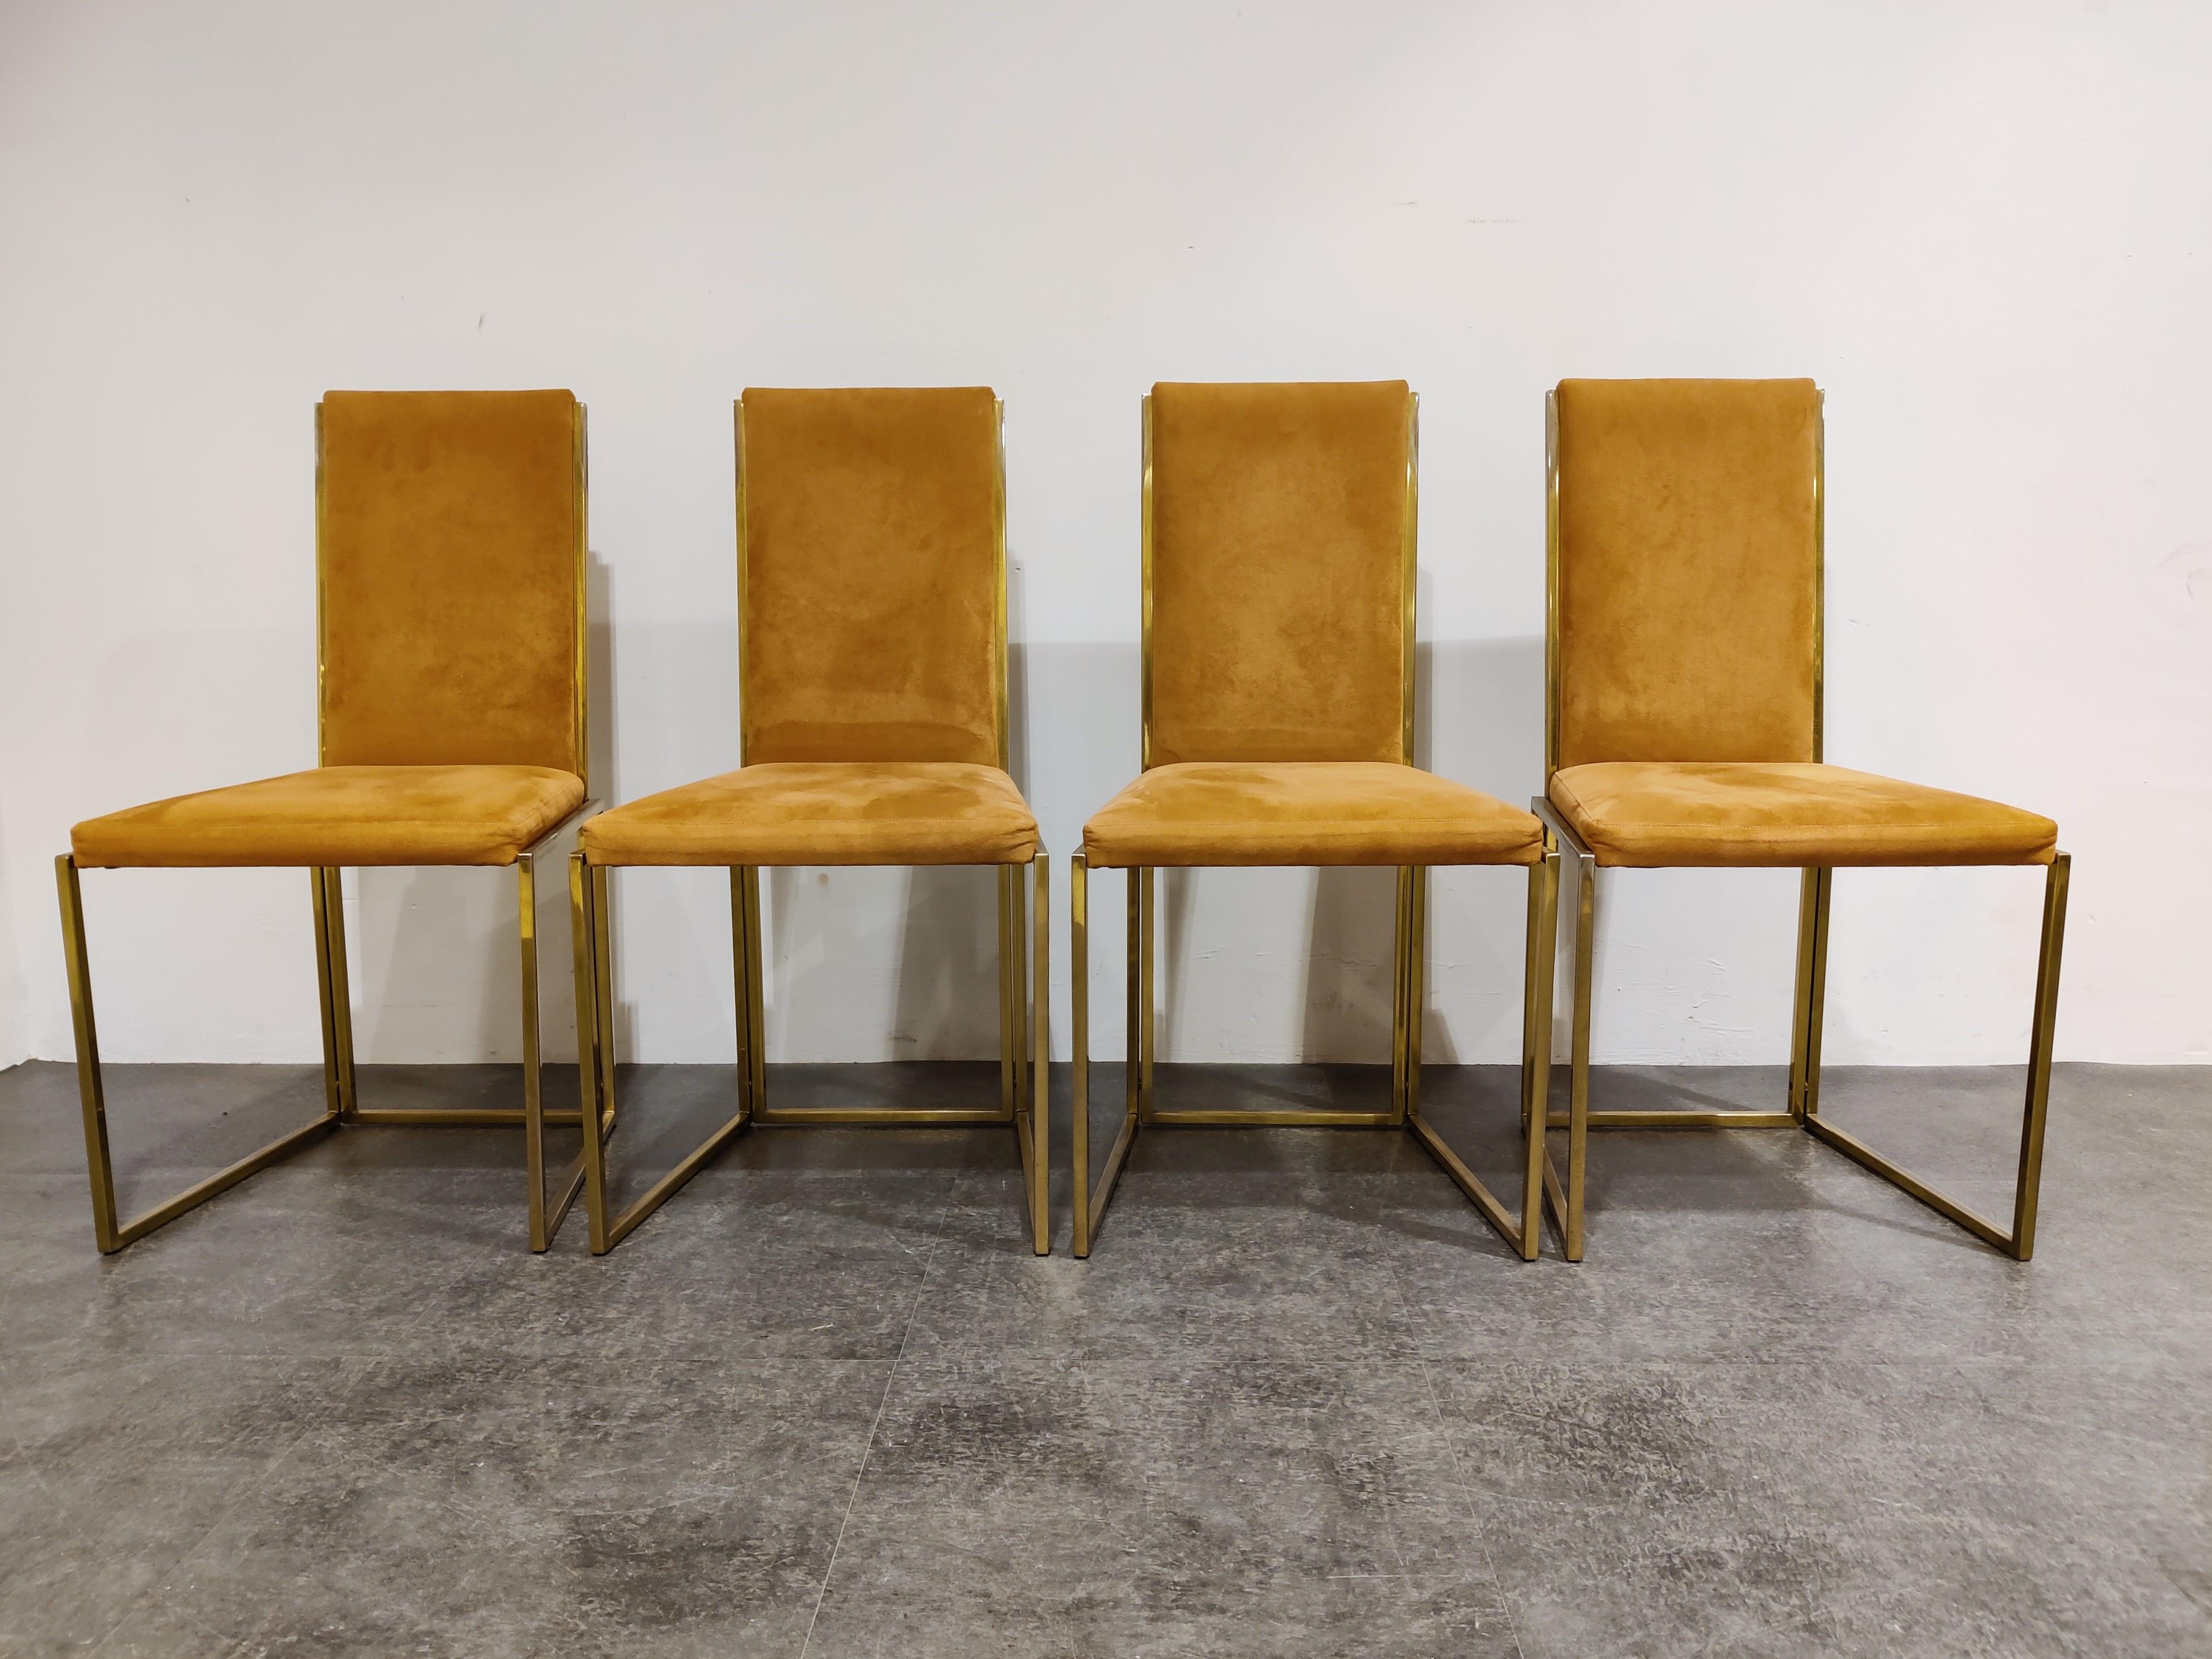 Set of 4 brass dining chairs by Belgocrhom with a cognac suede upholstery.

These chairs bring up the seventies and eighties glam atmosphere back into your home and are of a very good quality. 

Belgochrom used to make top end quality